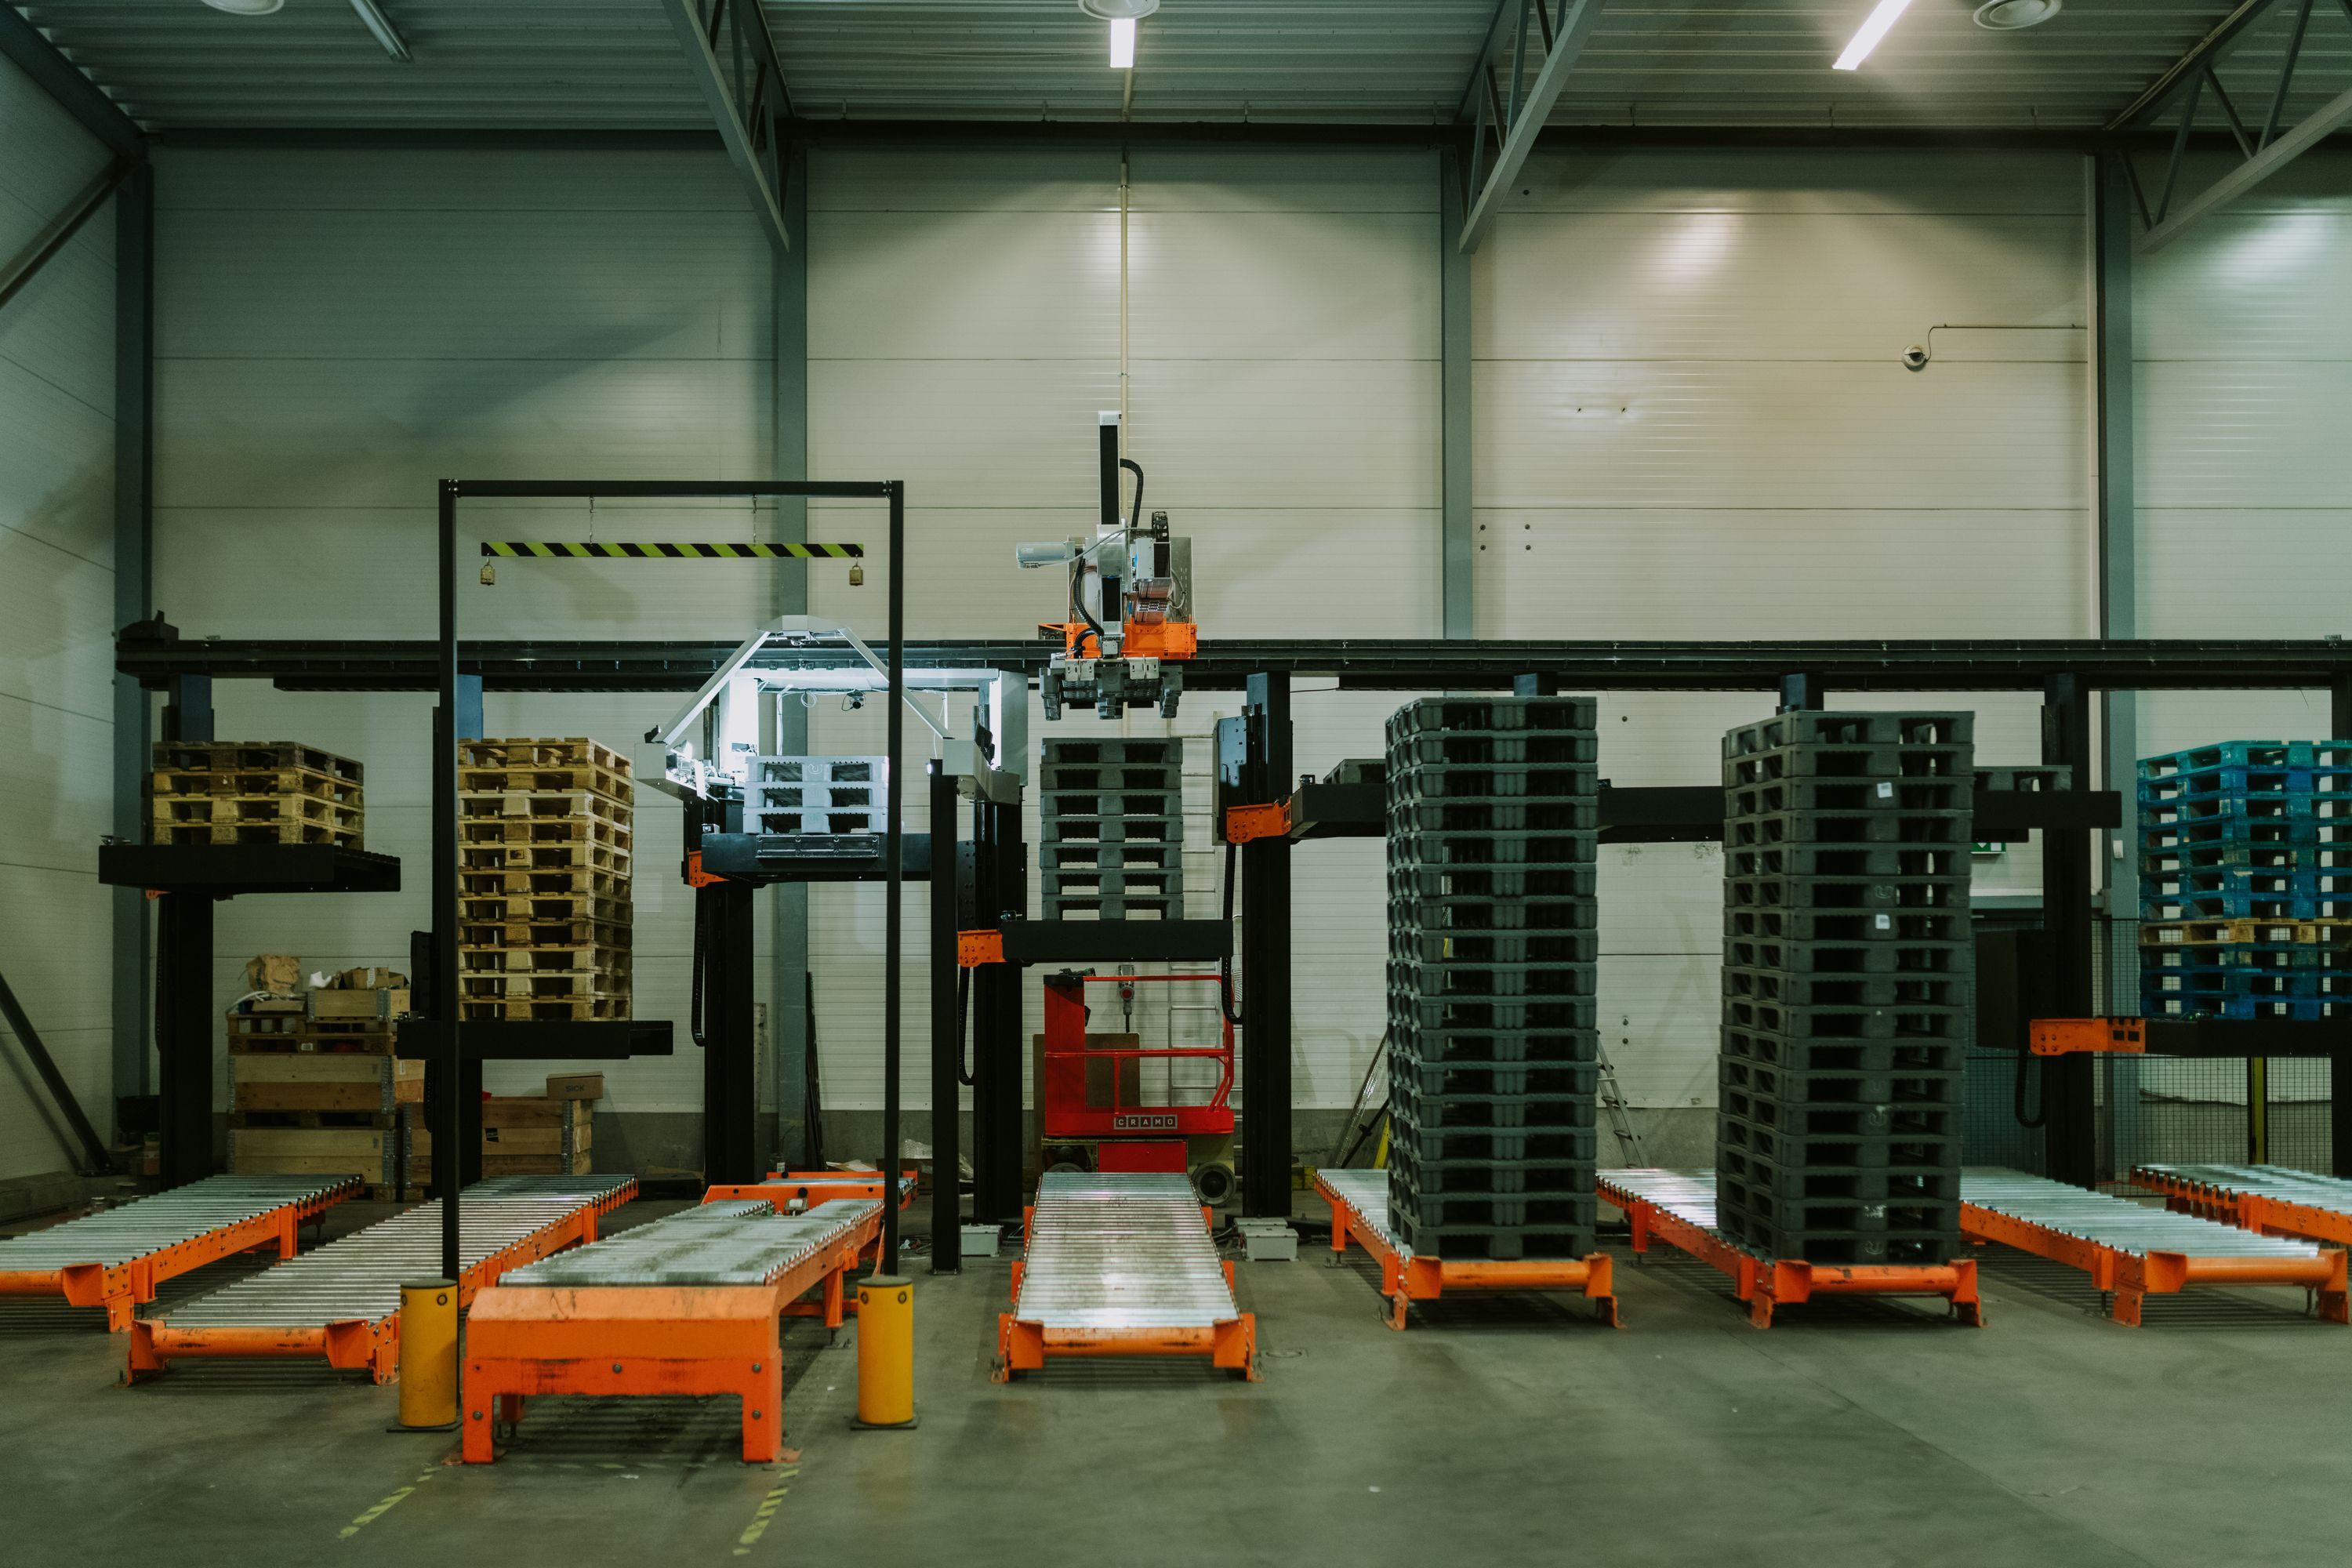 A dimly lit warehouse filled with pallets and Solwr's robotic arm sorting them